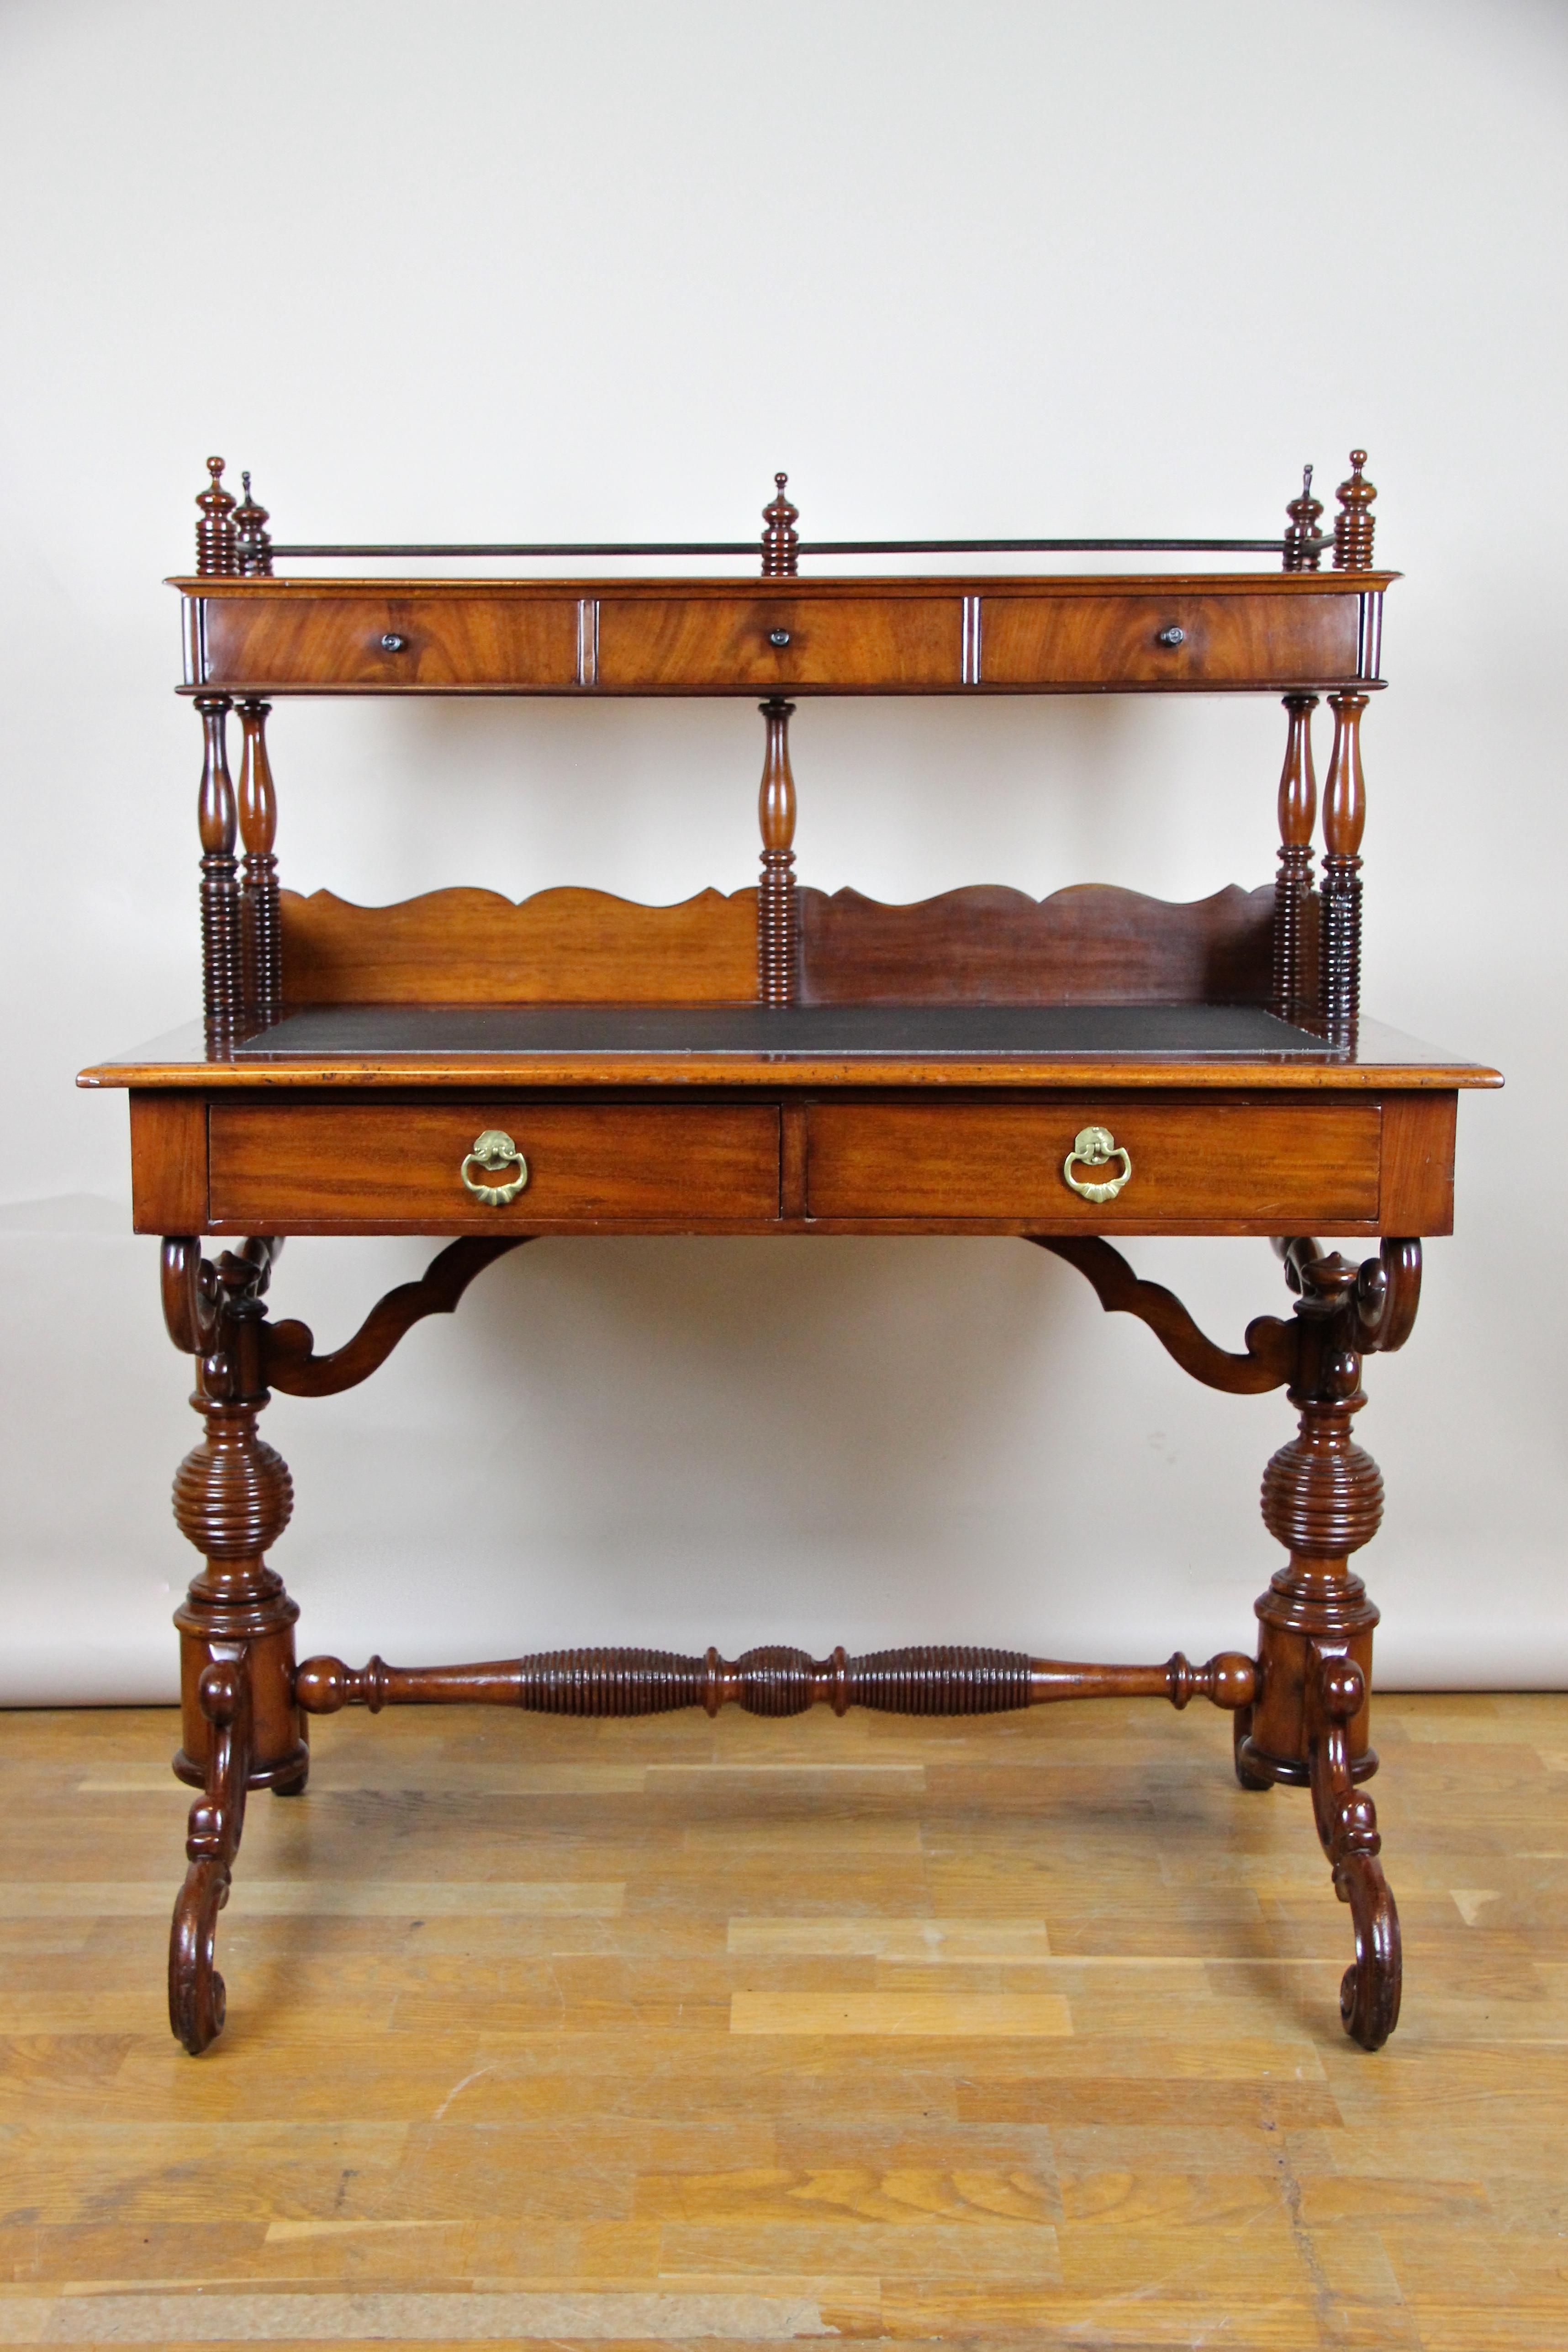 Extraordinary Louis Philippe writing desk out of France from the period, circa 1860. This impressing restored antique desk from the famous Louis Philippe era shows best the recurring influence of the Baroque at this time. This compact sized writing